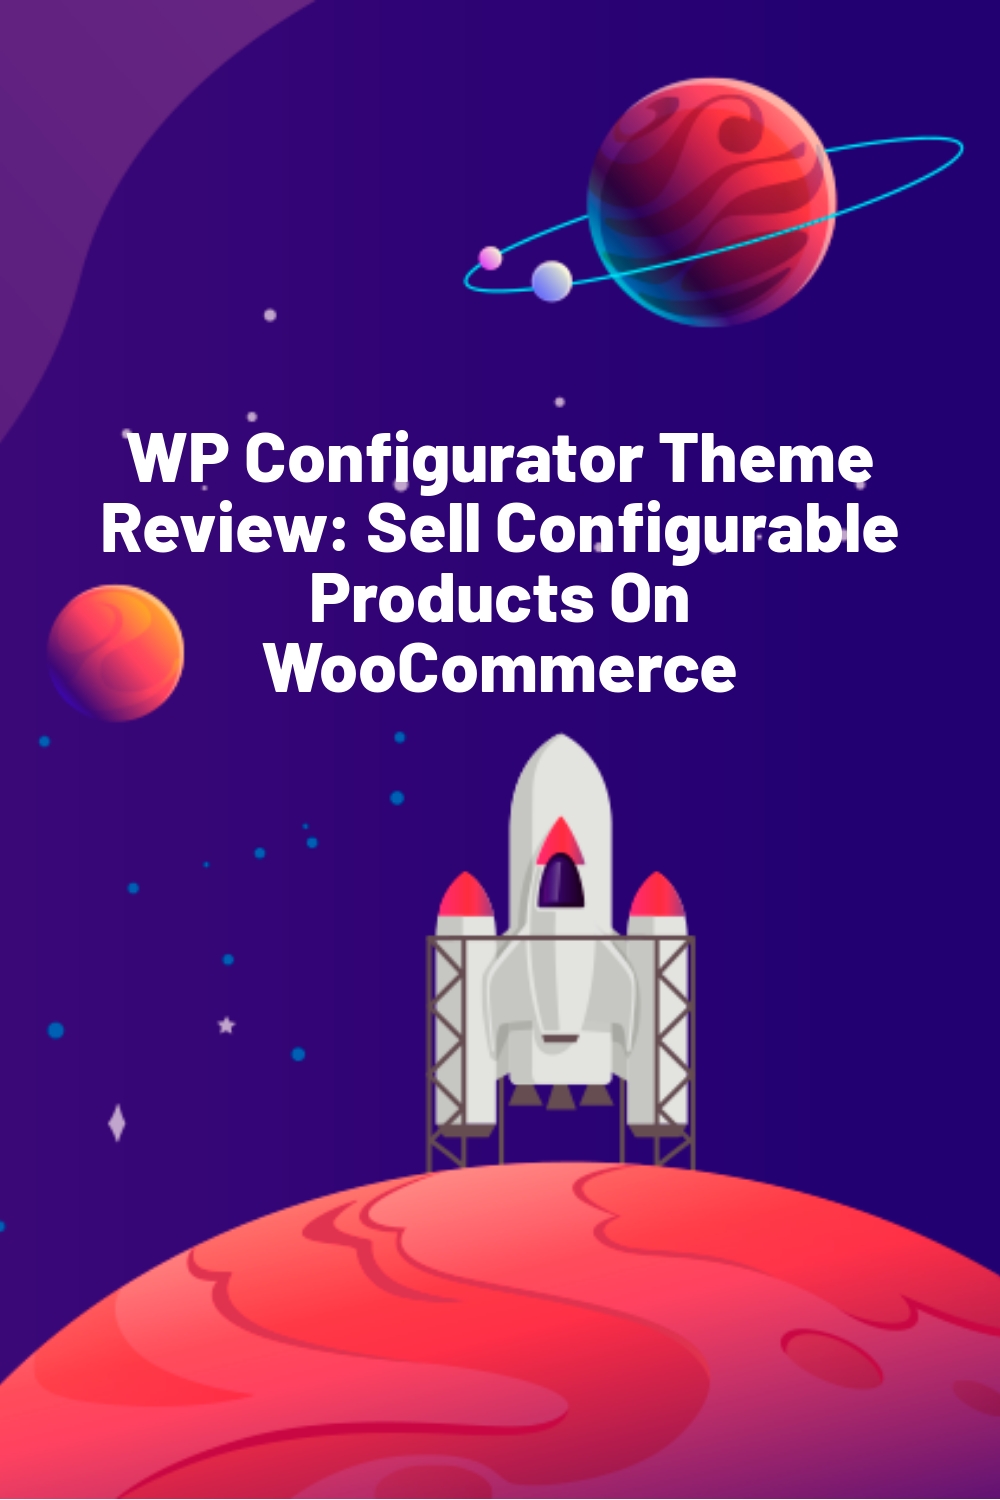 WP Configurator Theme Review: Sell Configurable Products On WooCommerce